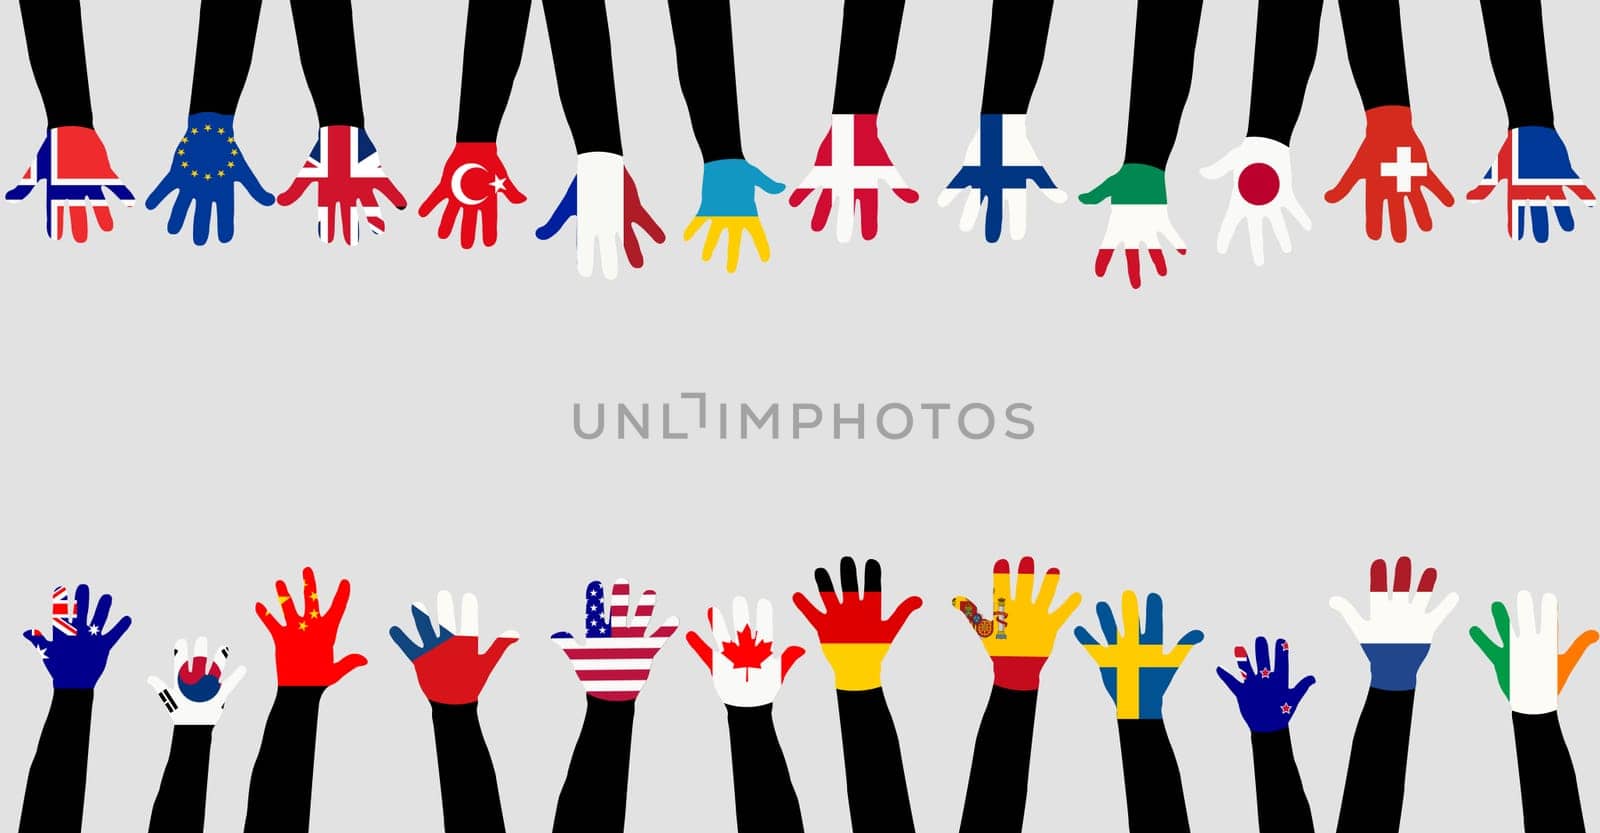 Children's hands painted in the colors of the world flags